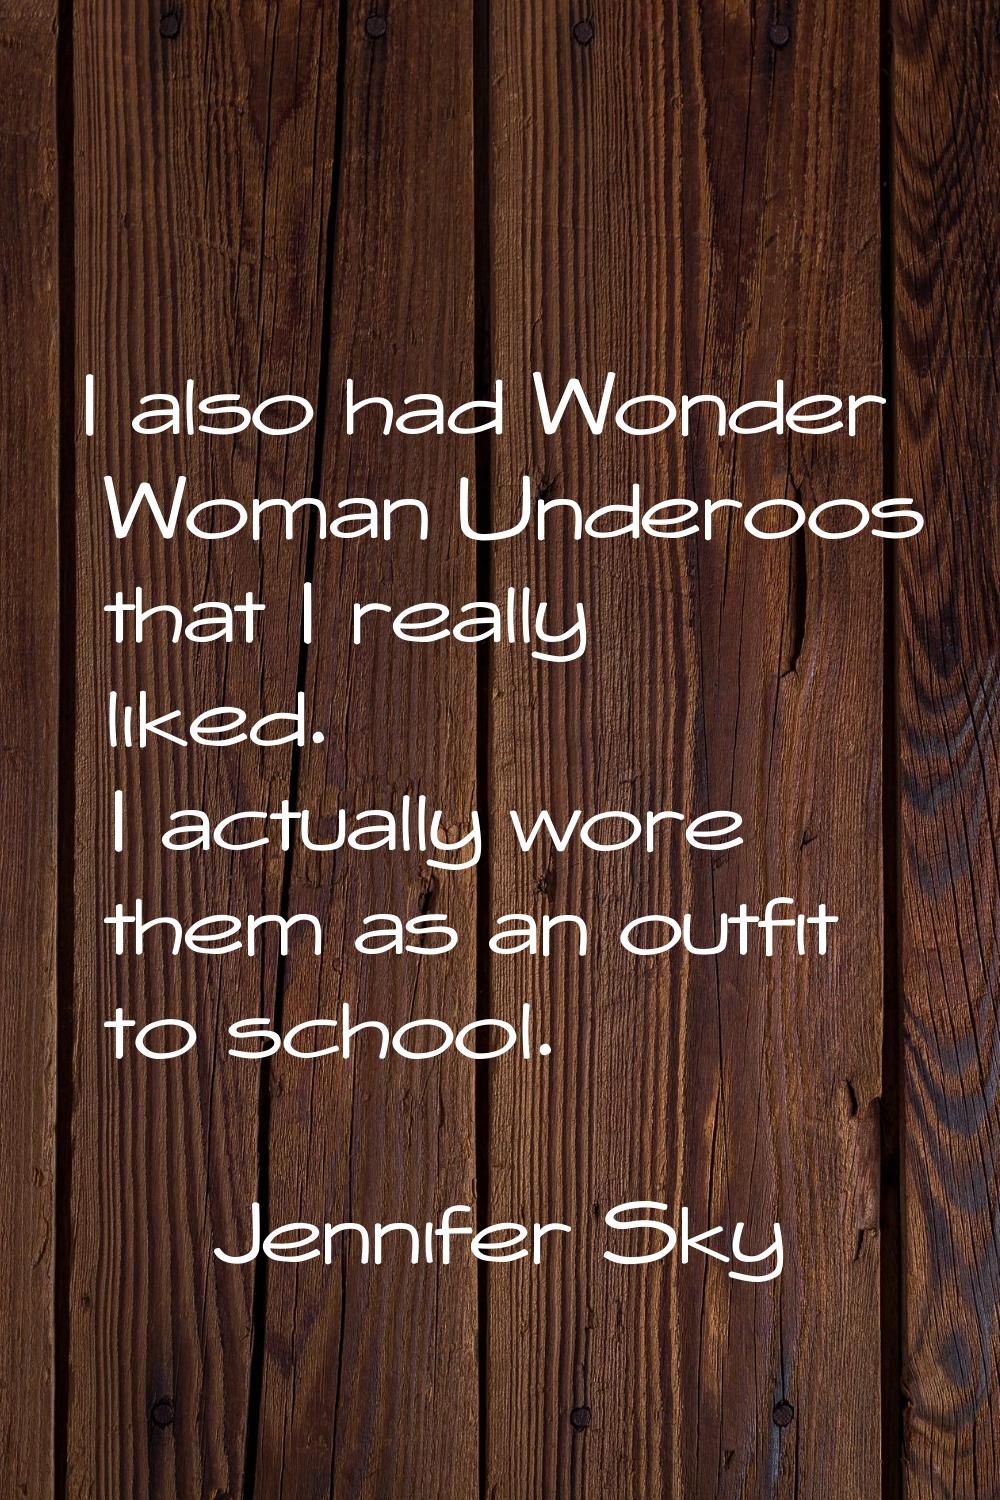 I also had Wonder Woman Underoos that I really liked. I actually wore them as an outfit to school.